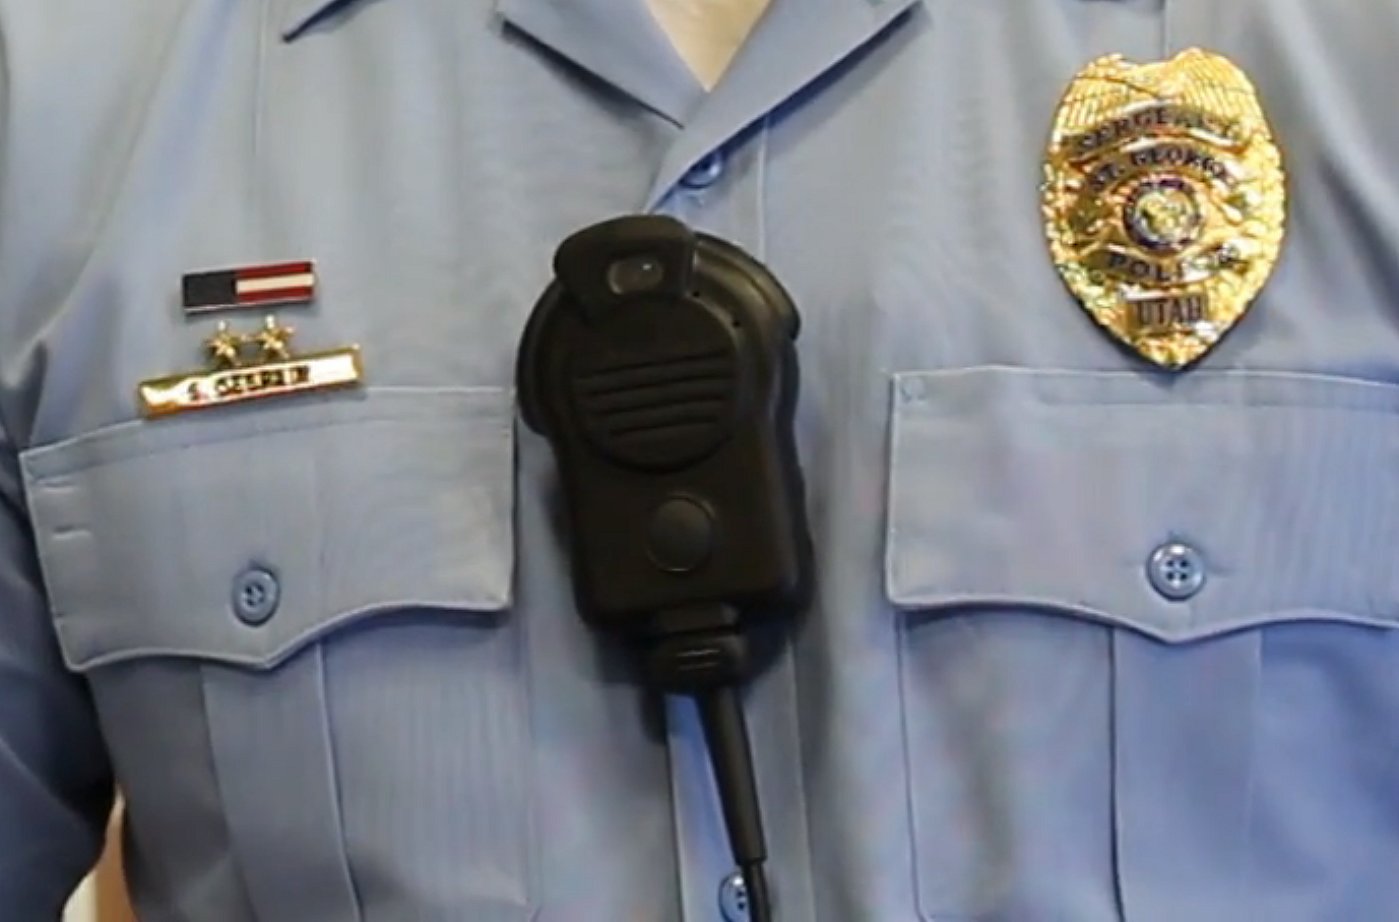 One of the body cameras tested by the St. George Police Department in 2015, St. George, Utah, May 16, 2015 | Photo by Mori Kessler, St. George News